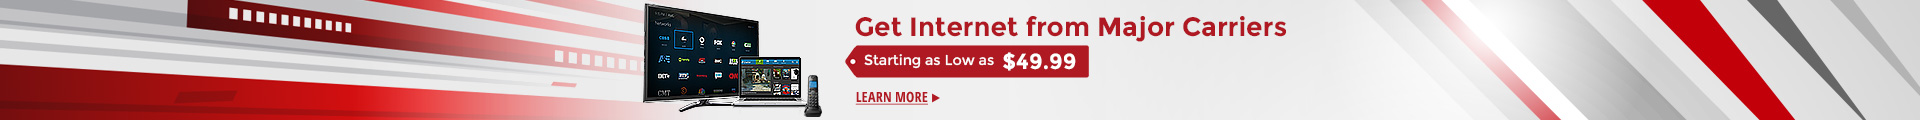 Get Internet from Major Carriers